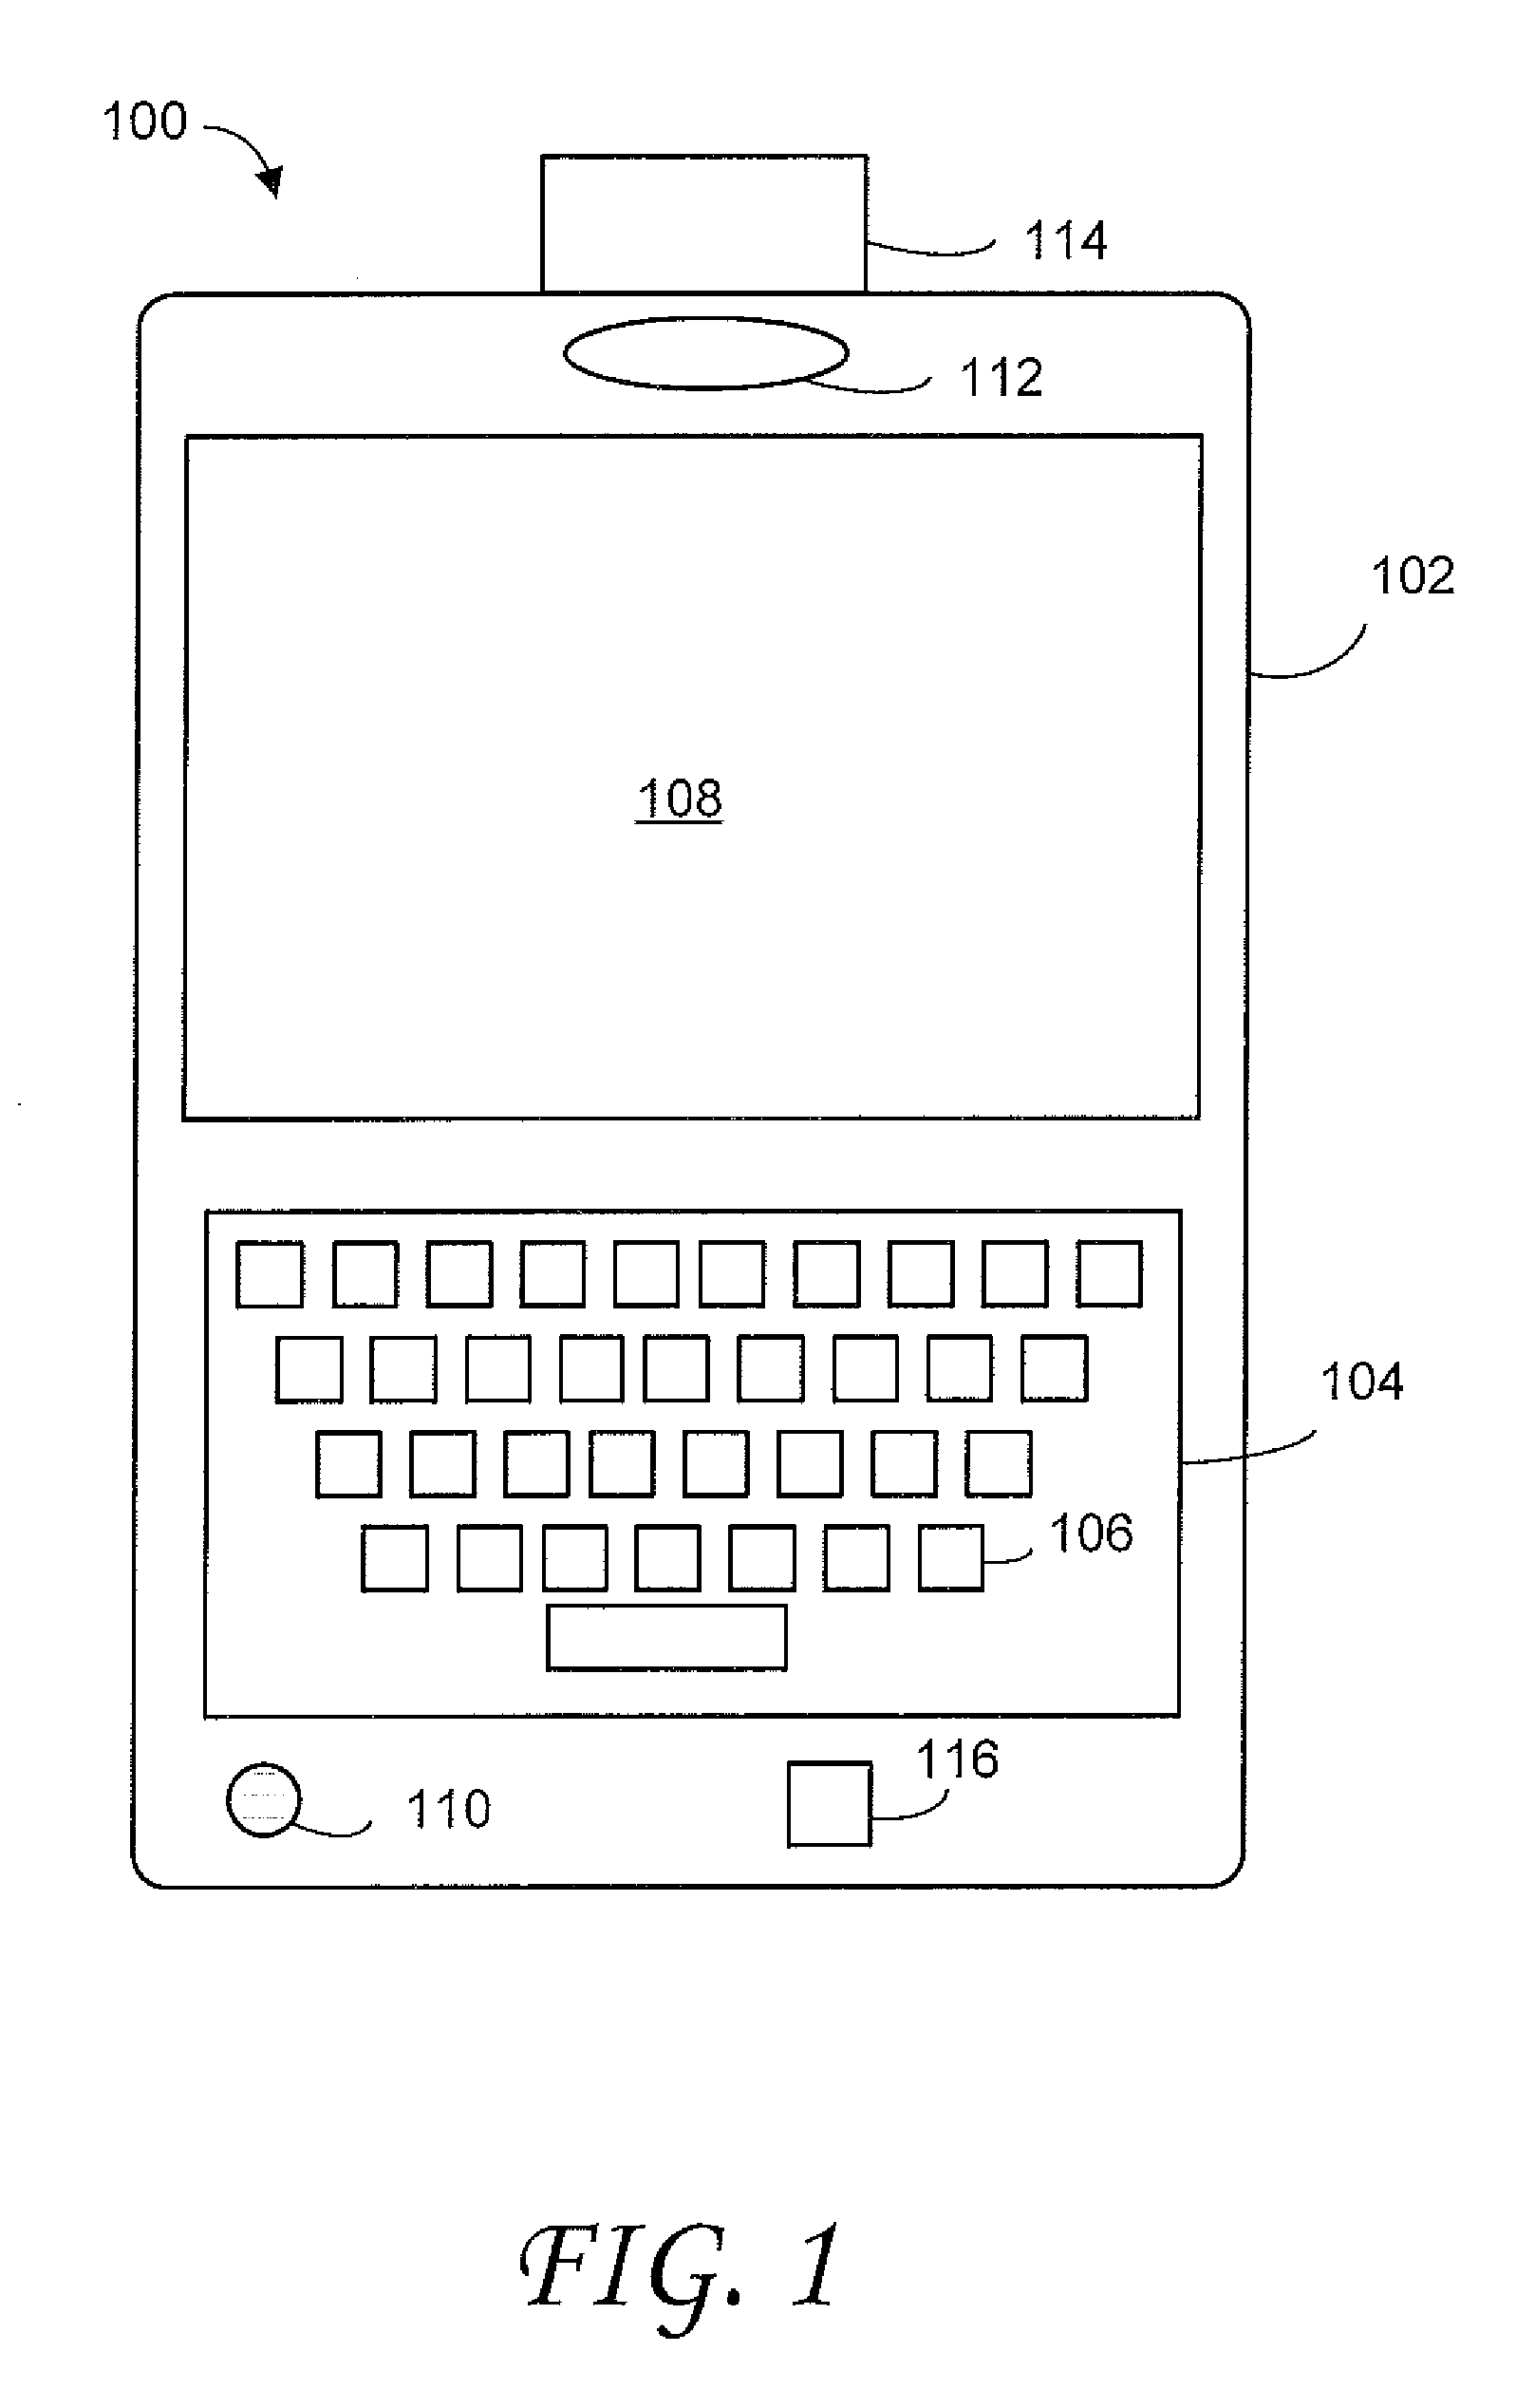 Method and apparatus for enhanced document capture